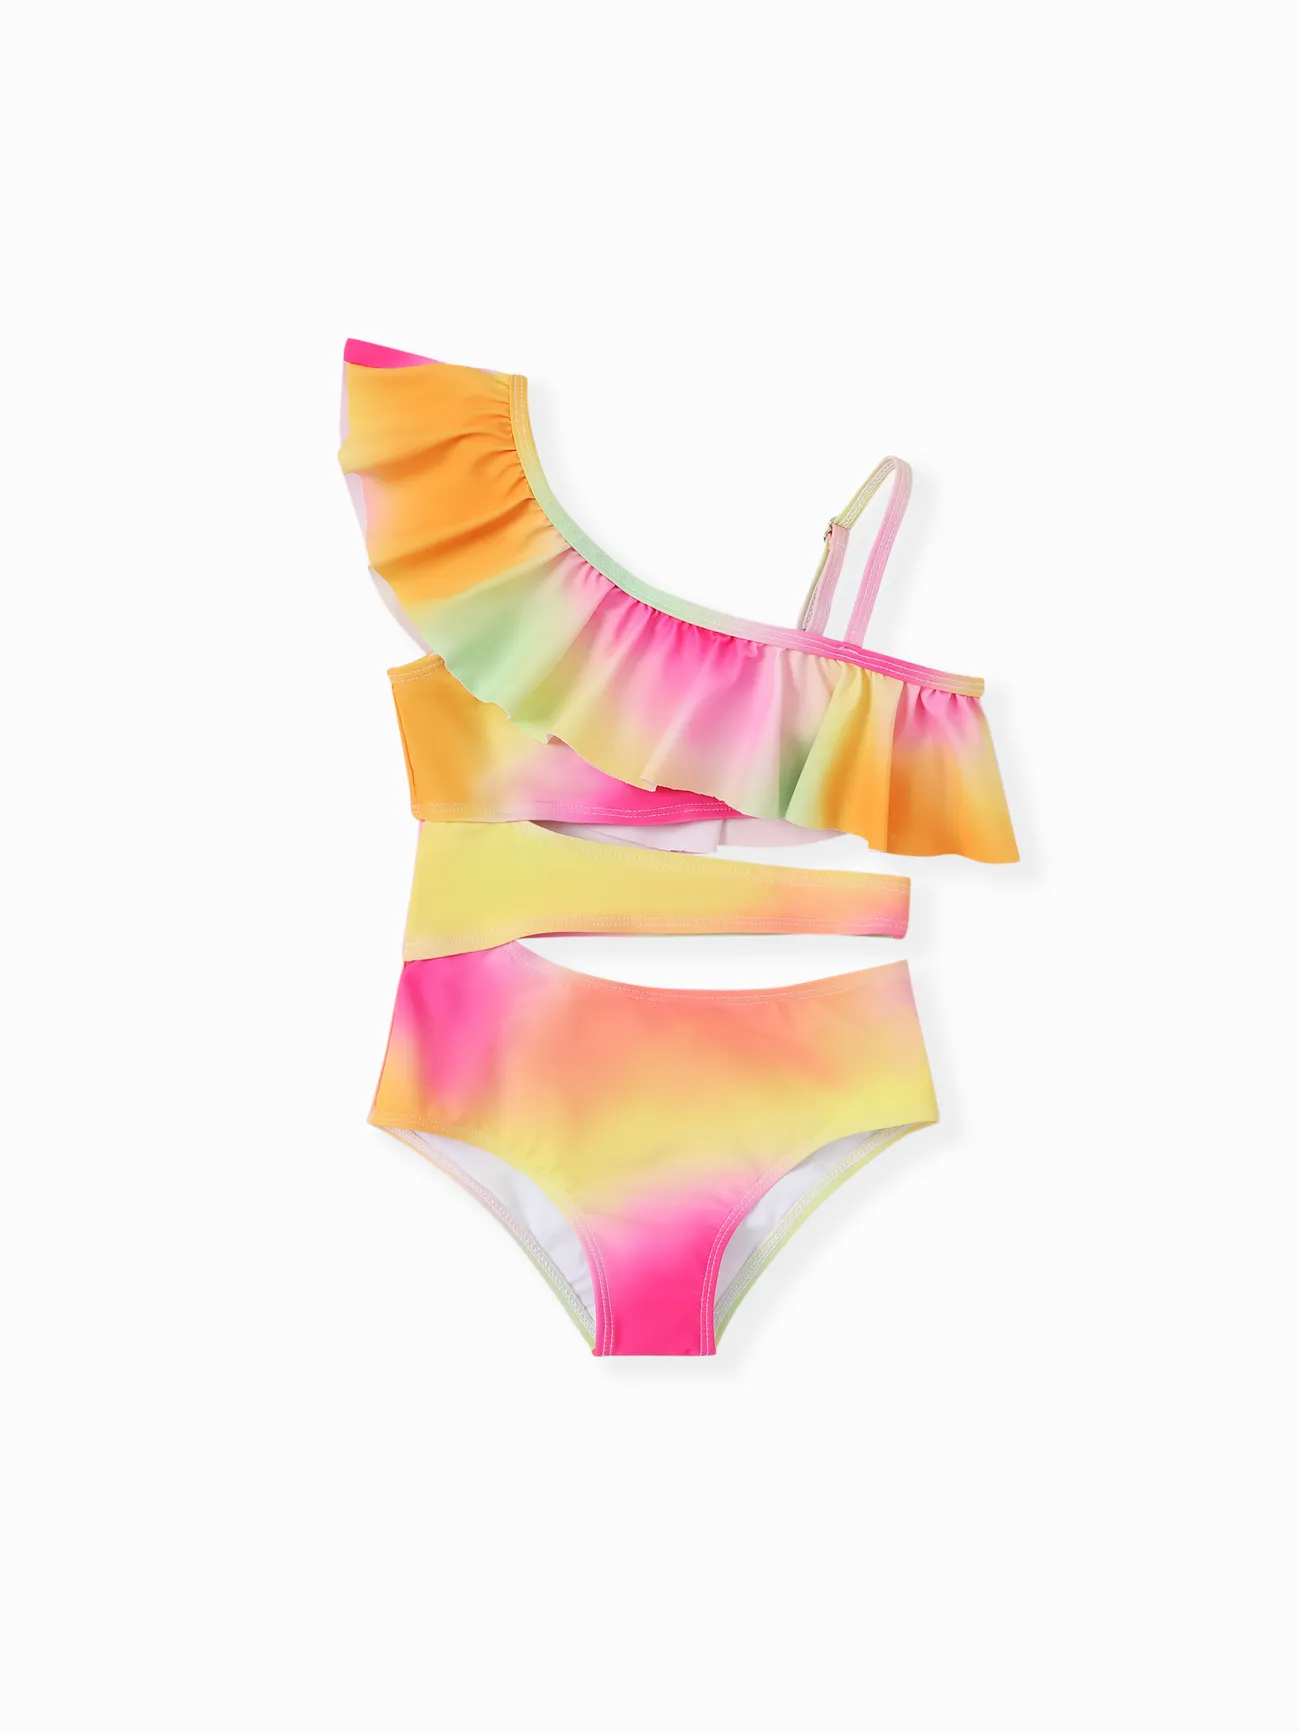 Sweet Girl Ruffle Edge Swimsuit, Polyester Spandex, 1 Piece Multi-color big image 1